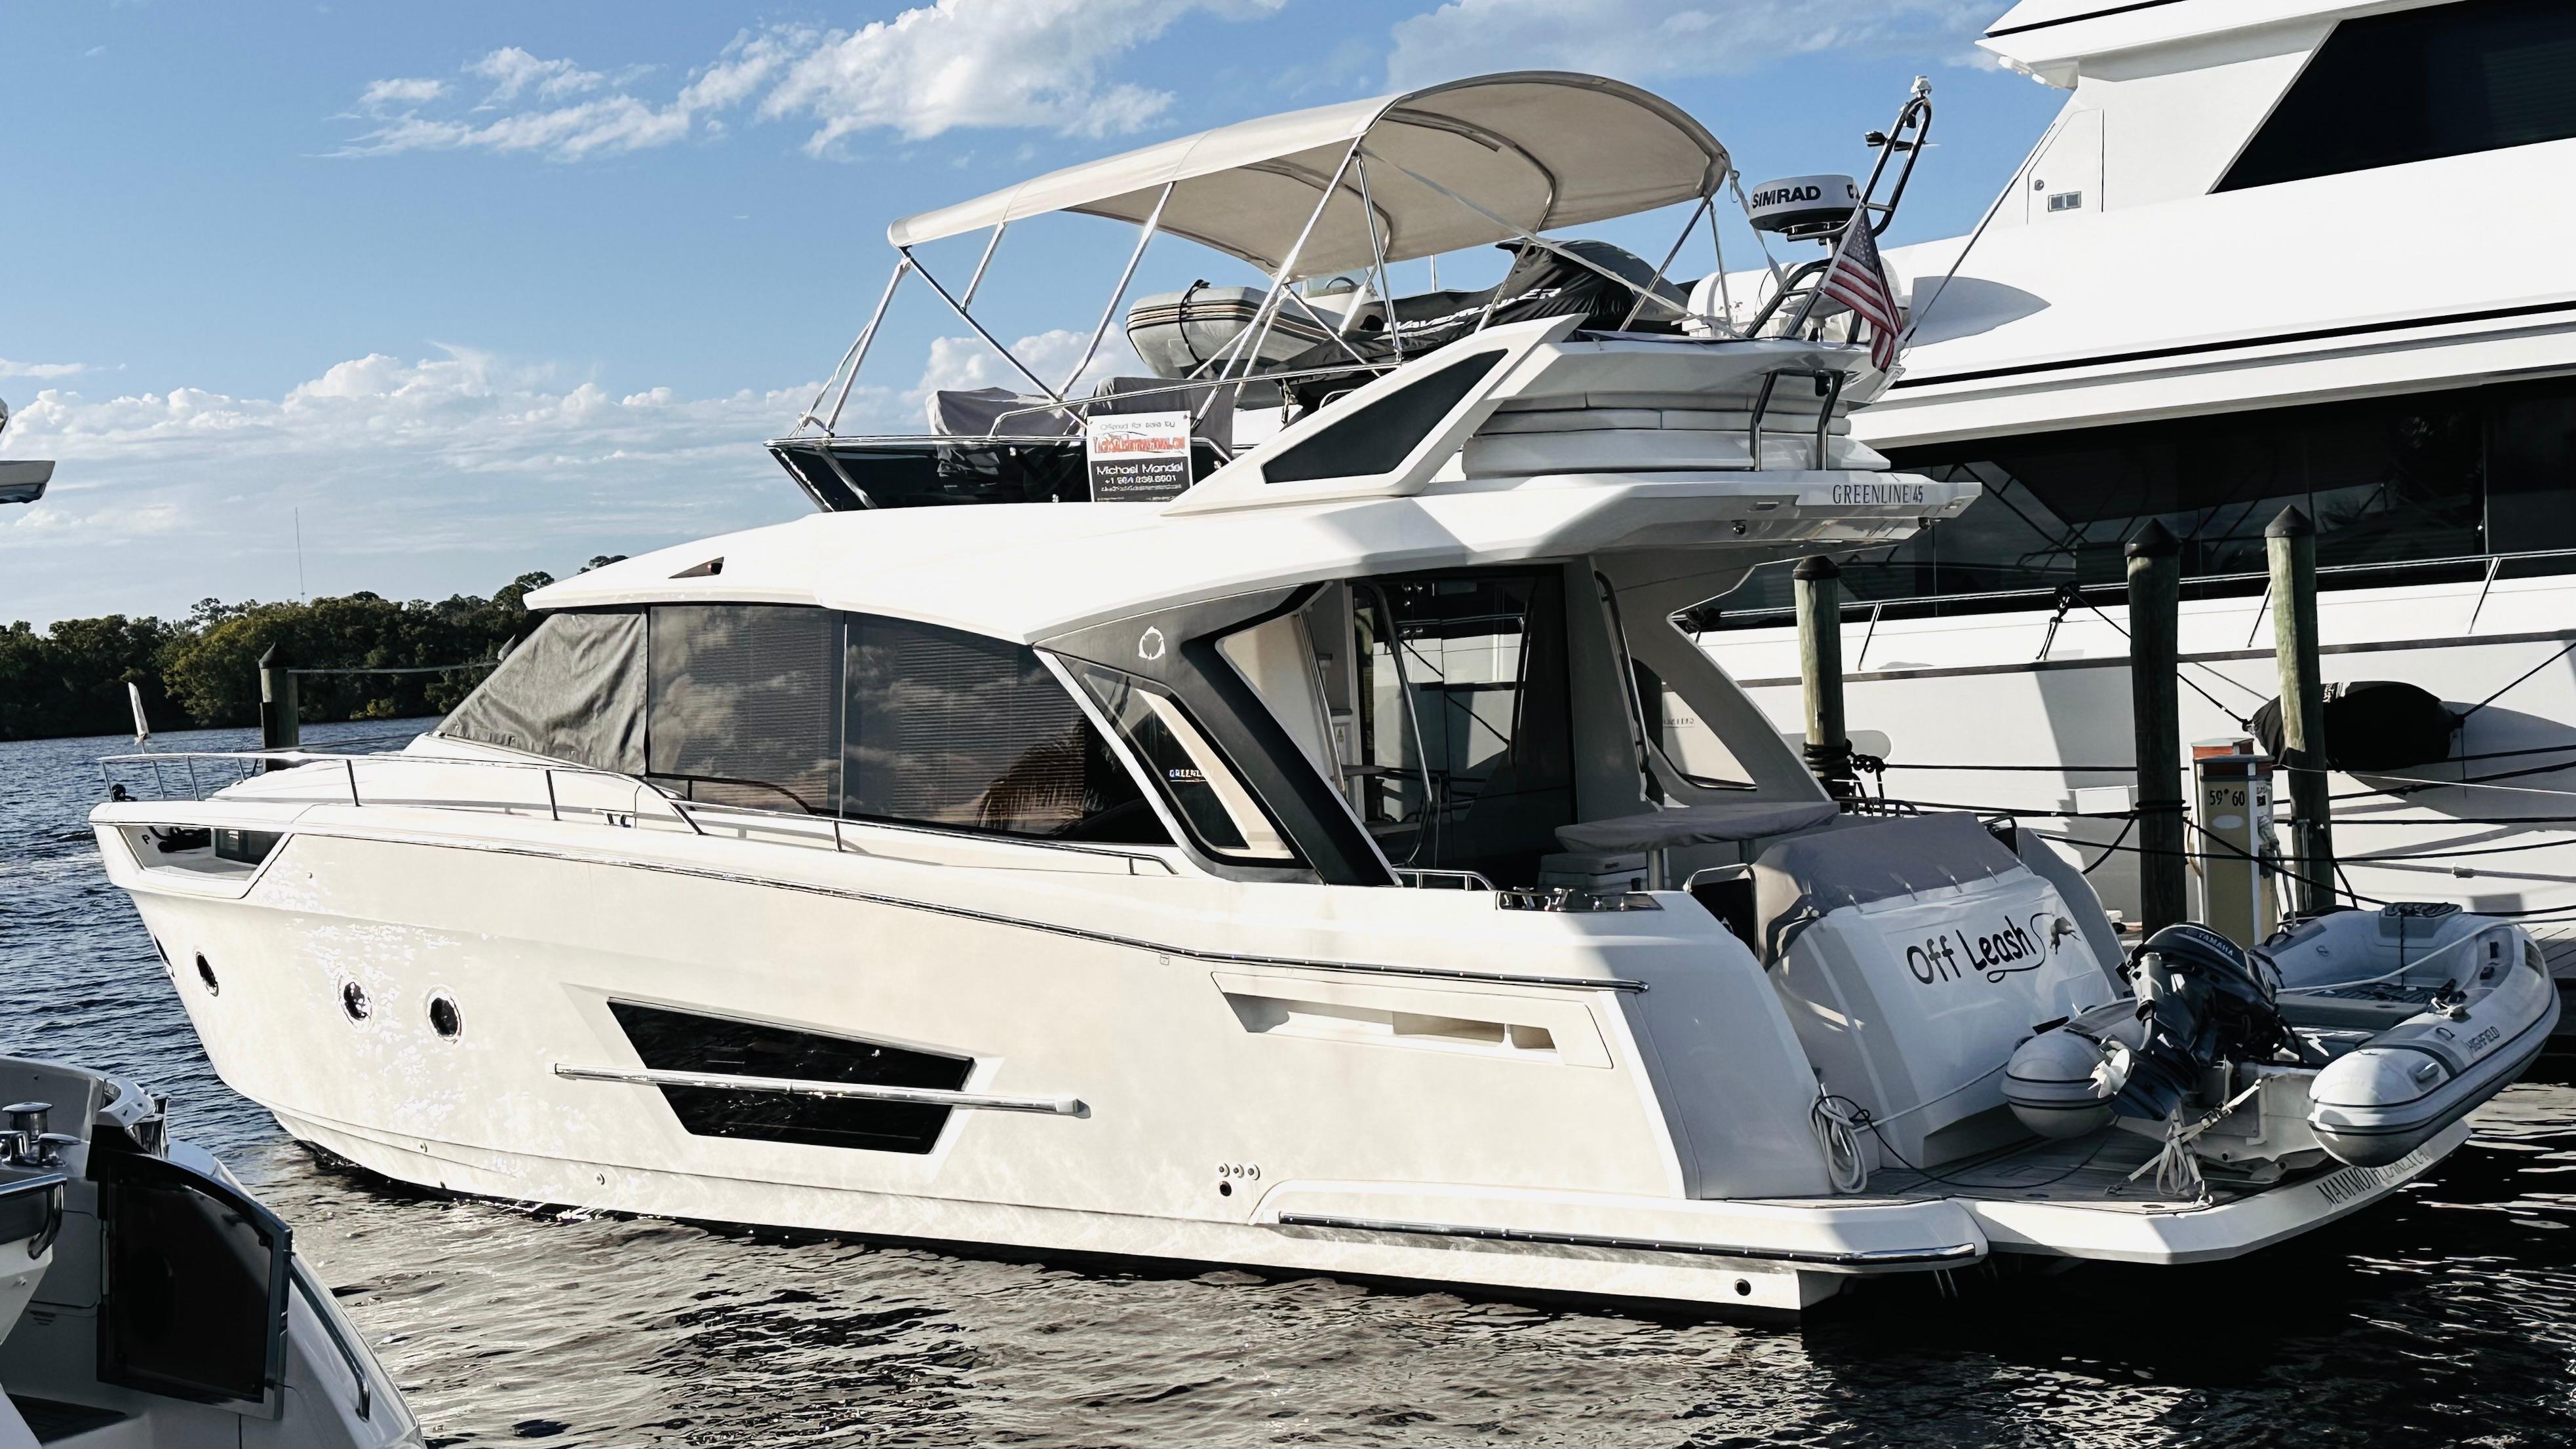 Off Leash Yacht for Sale, 45 Greenline Yachts Fort Myers, FL